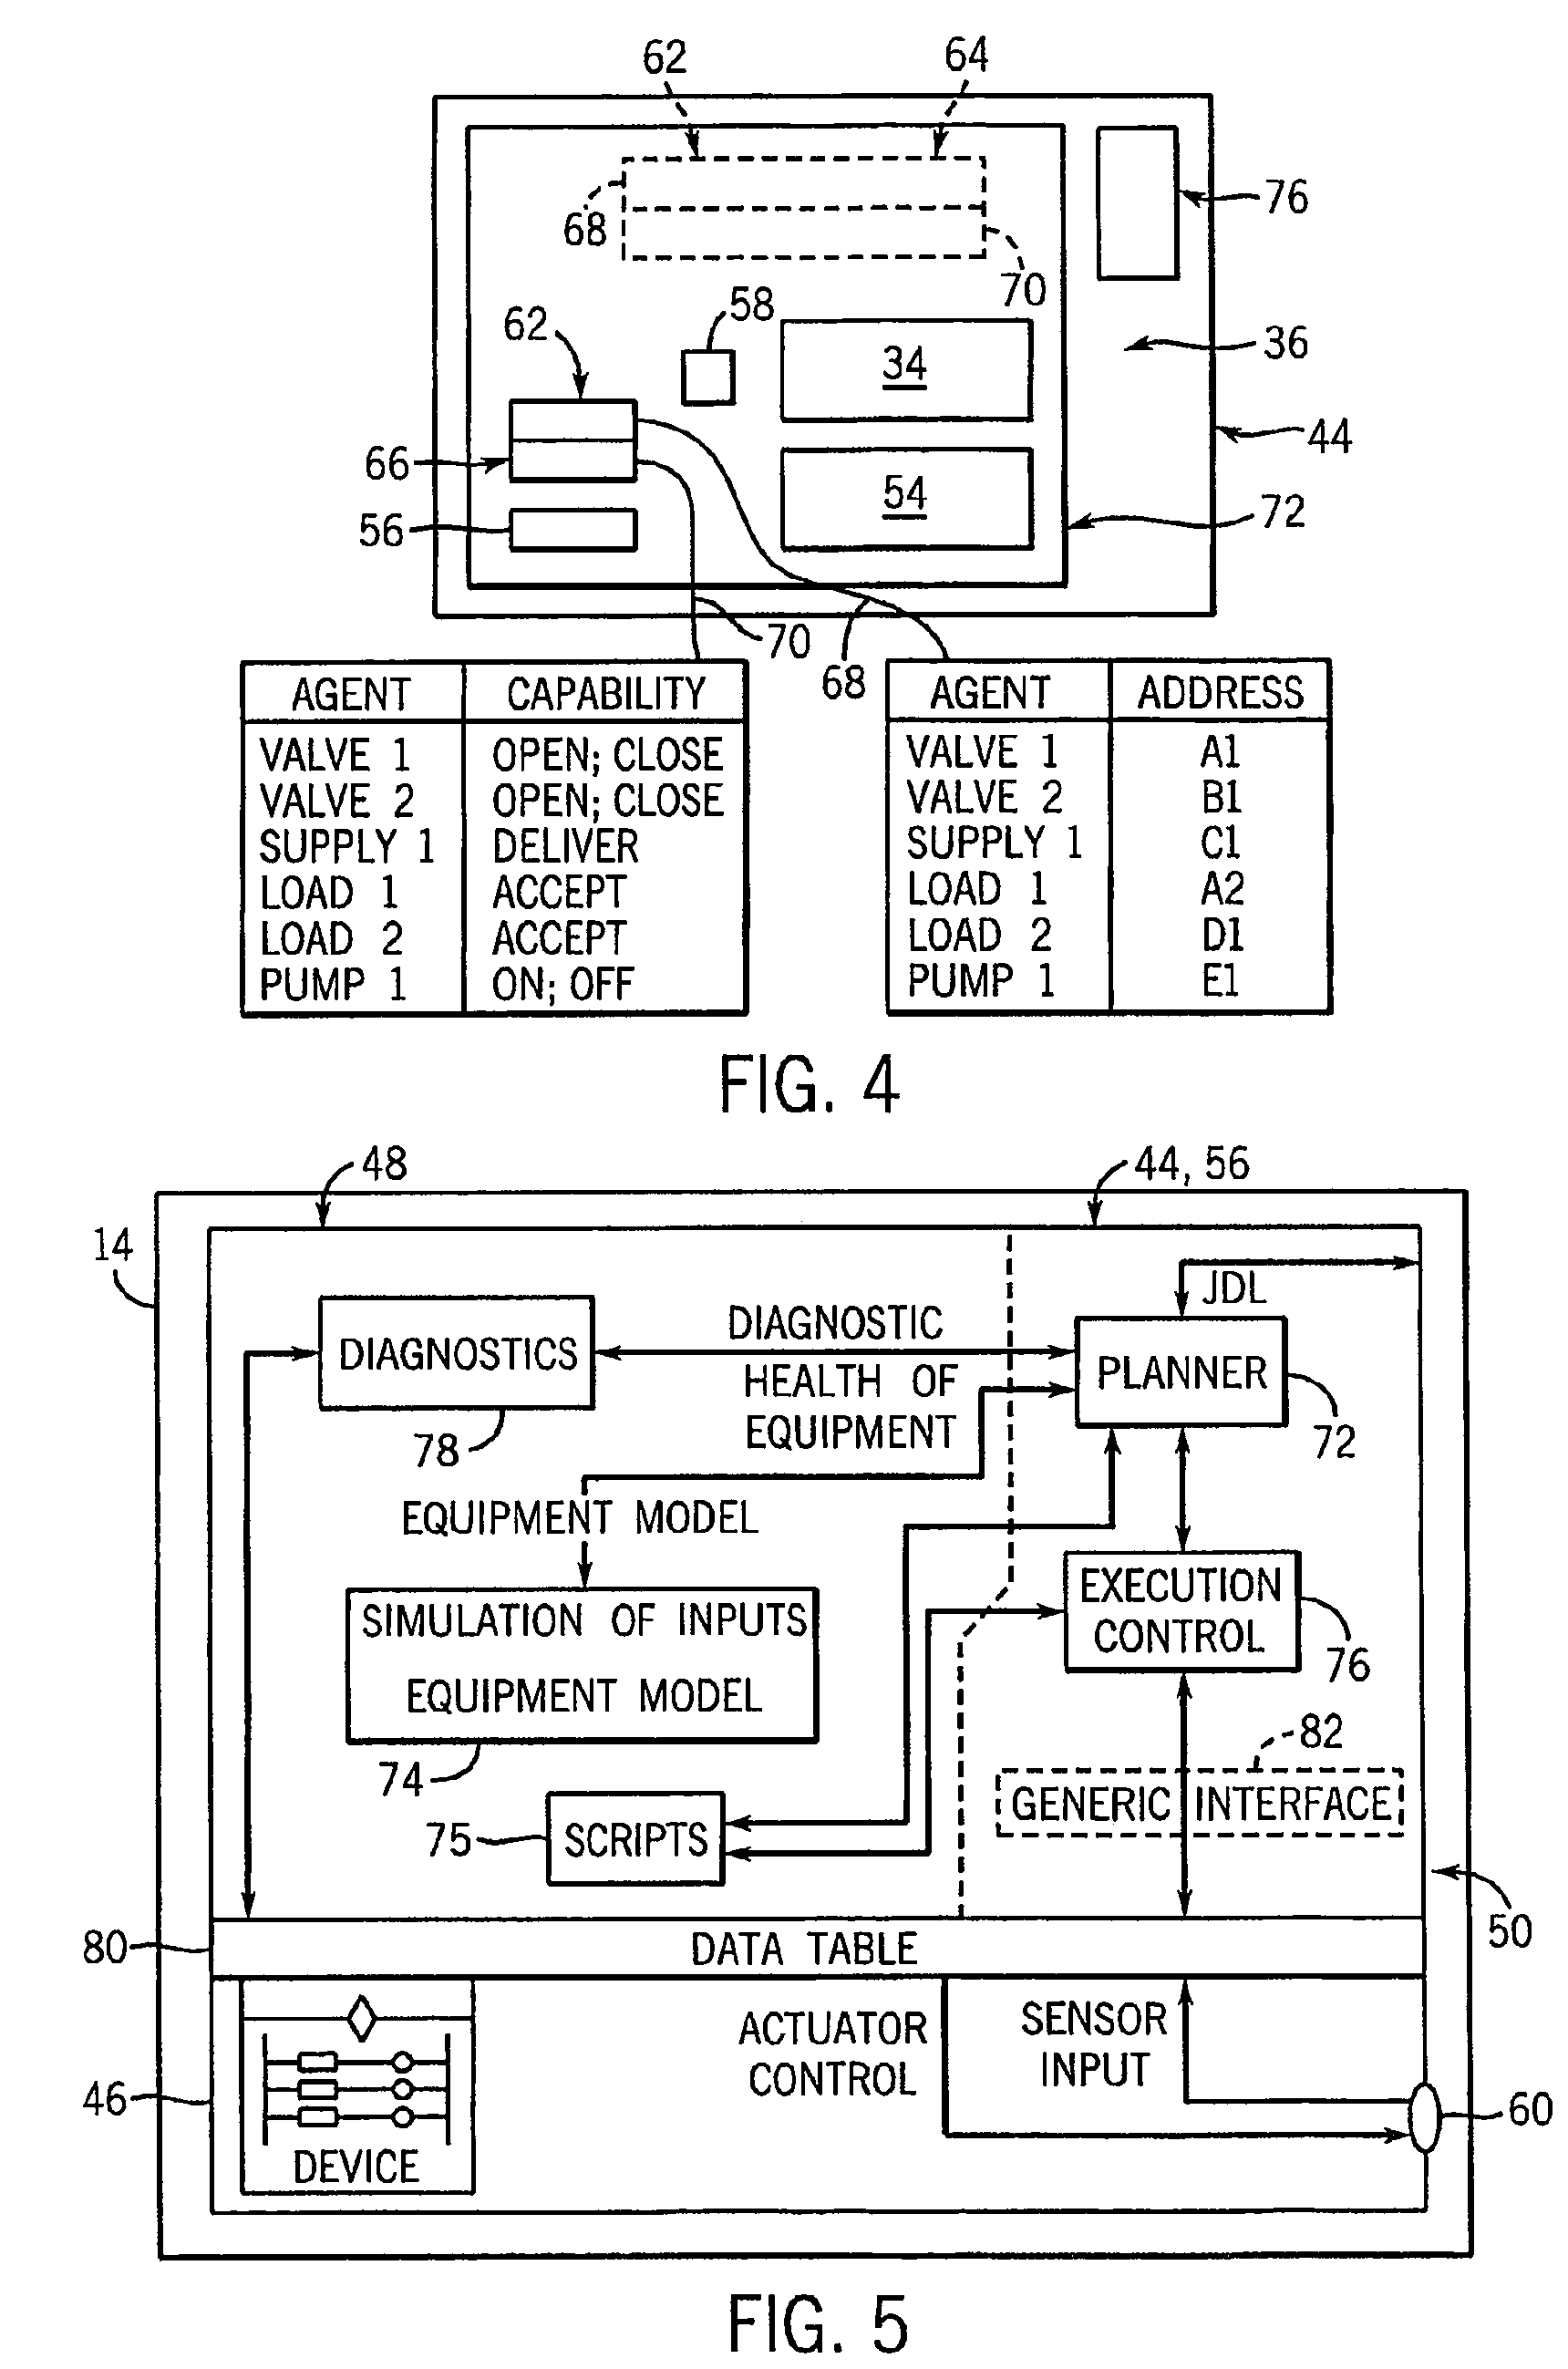 Agent-equipped controller having data table interface between agent-type programming and non-agent-type programming